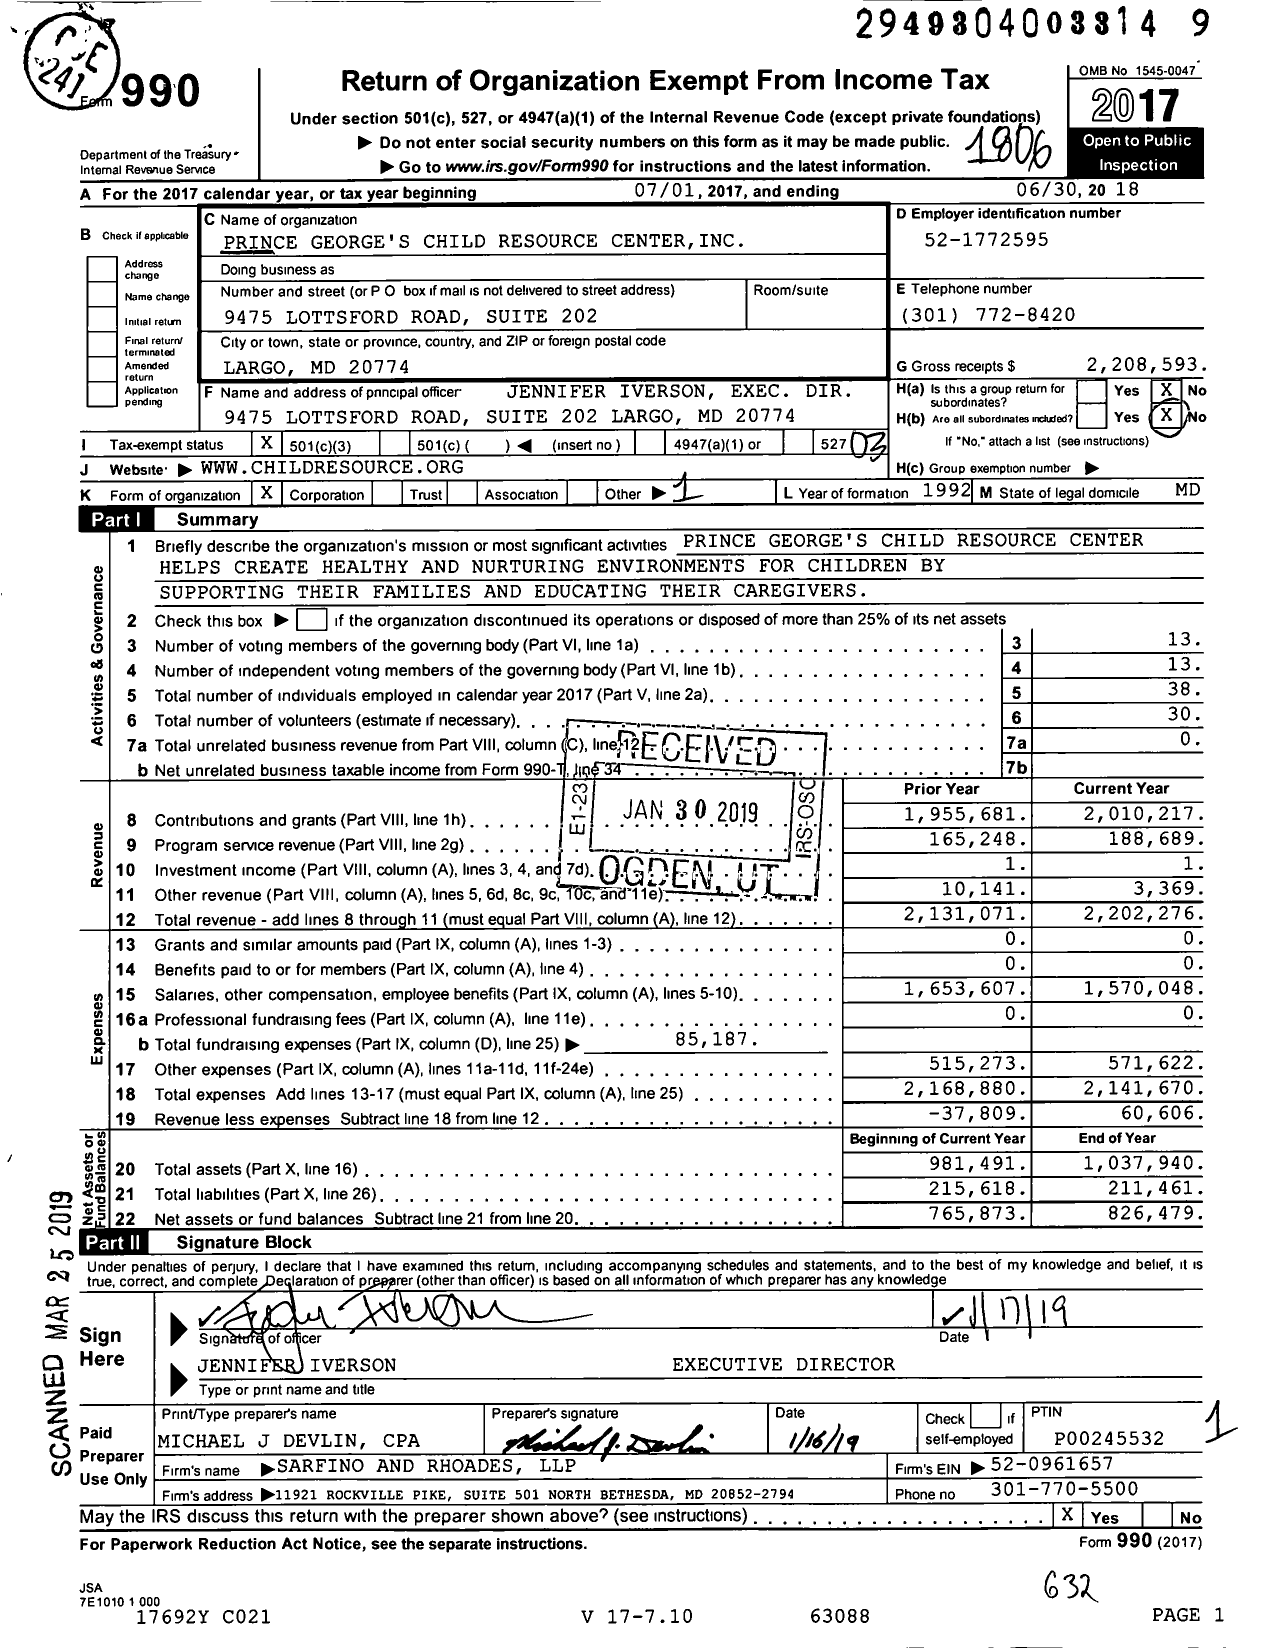 Image of first page of 2017 Form 990 for Prince George's Child Resource Center